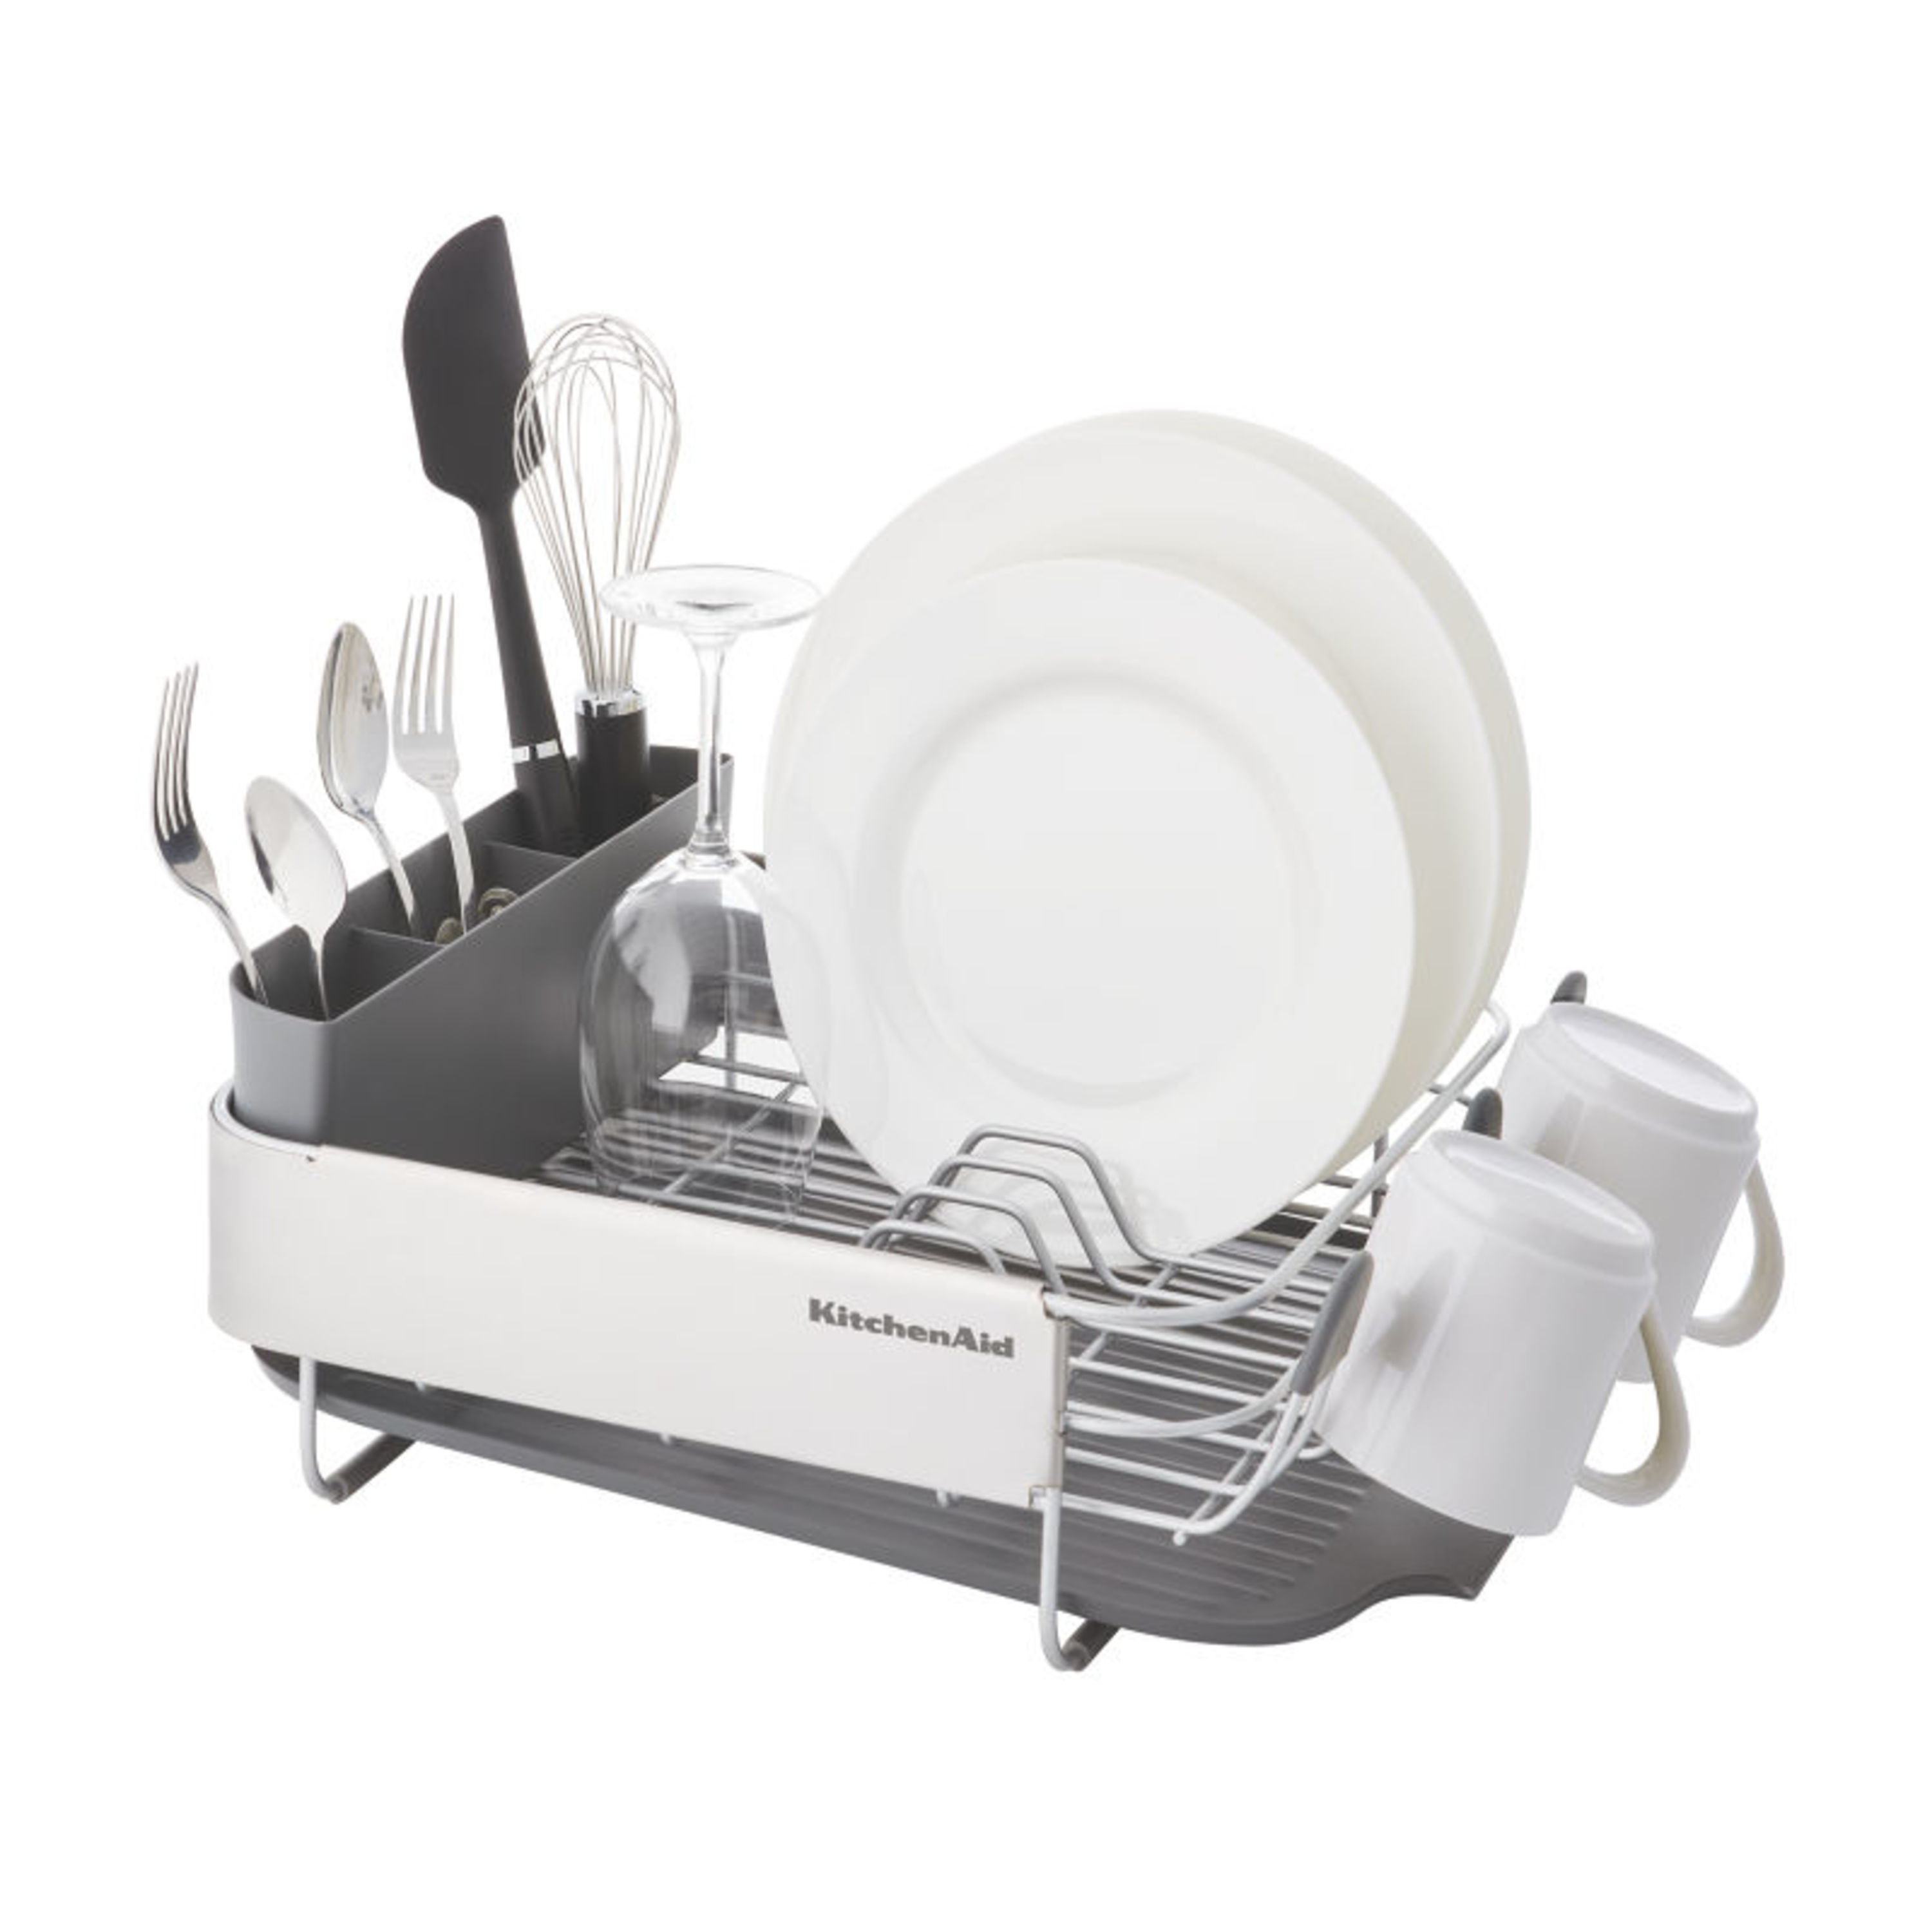 Kitchenaid Stainless Steel Wrap Compact Dish Rack in Satin Gray - image 4 of 9